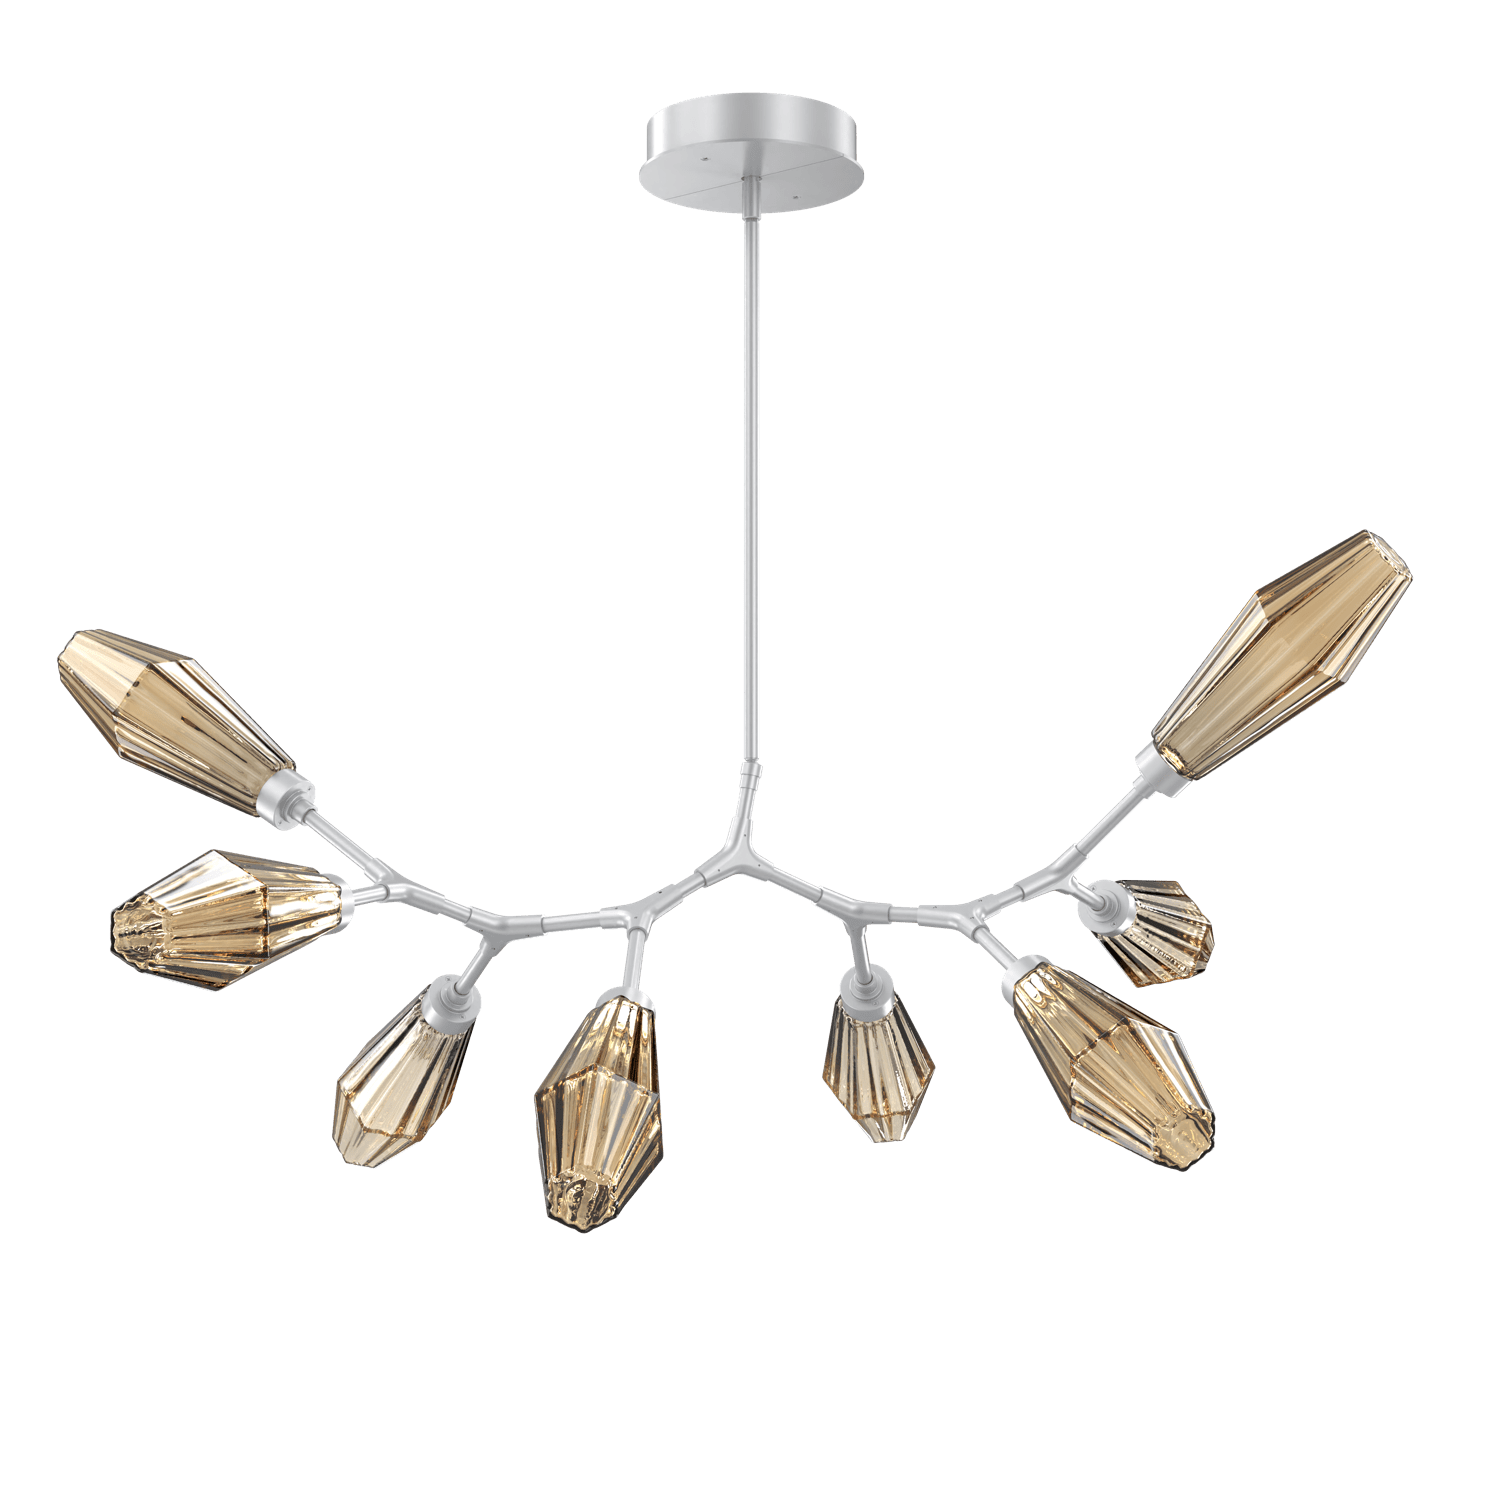 PLB0049-BB-CS-RB-Hammerton-Studio-Aalto-8-light-modern-branch-chandelier-with-classic-silver-finish-and-optic-ribbed-bronze-glass-shades-and-LED-lamping